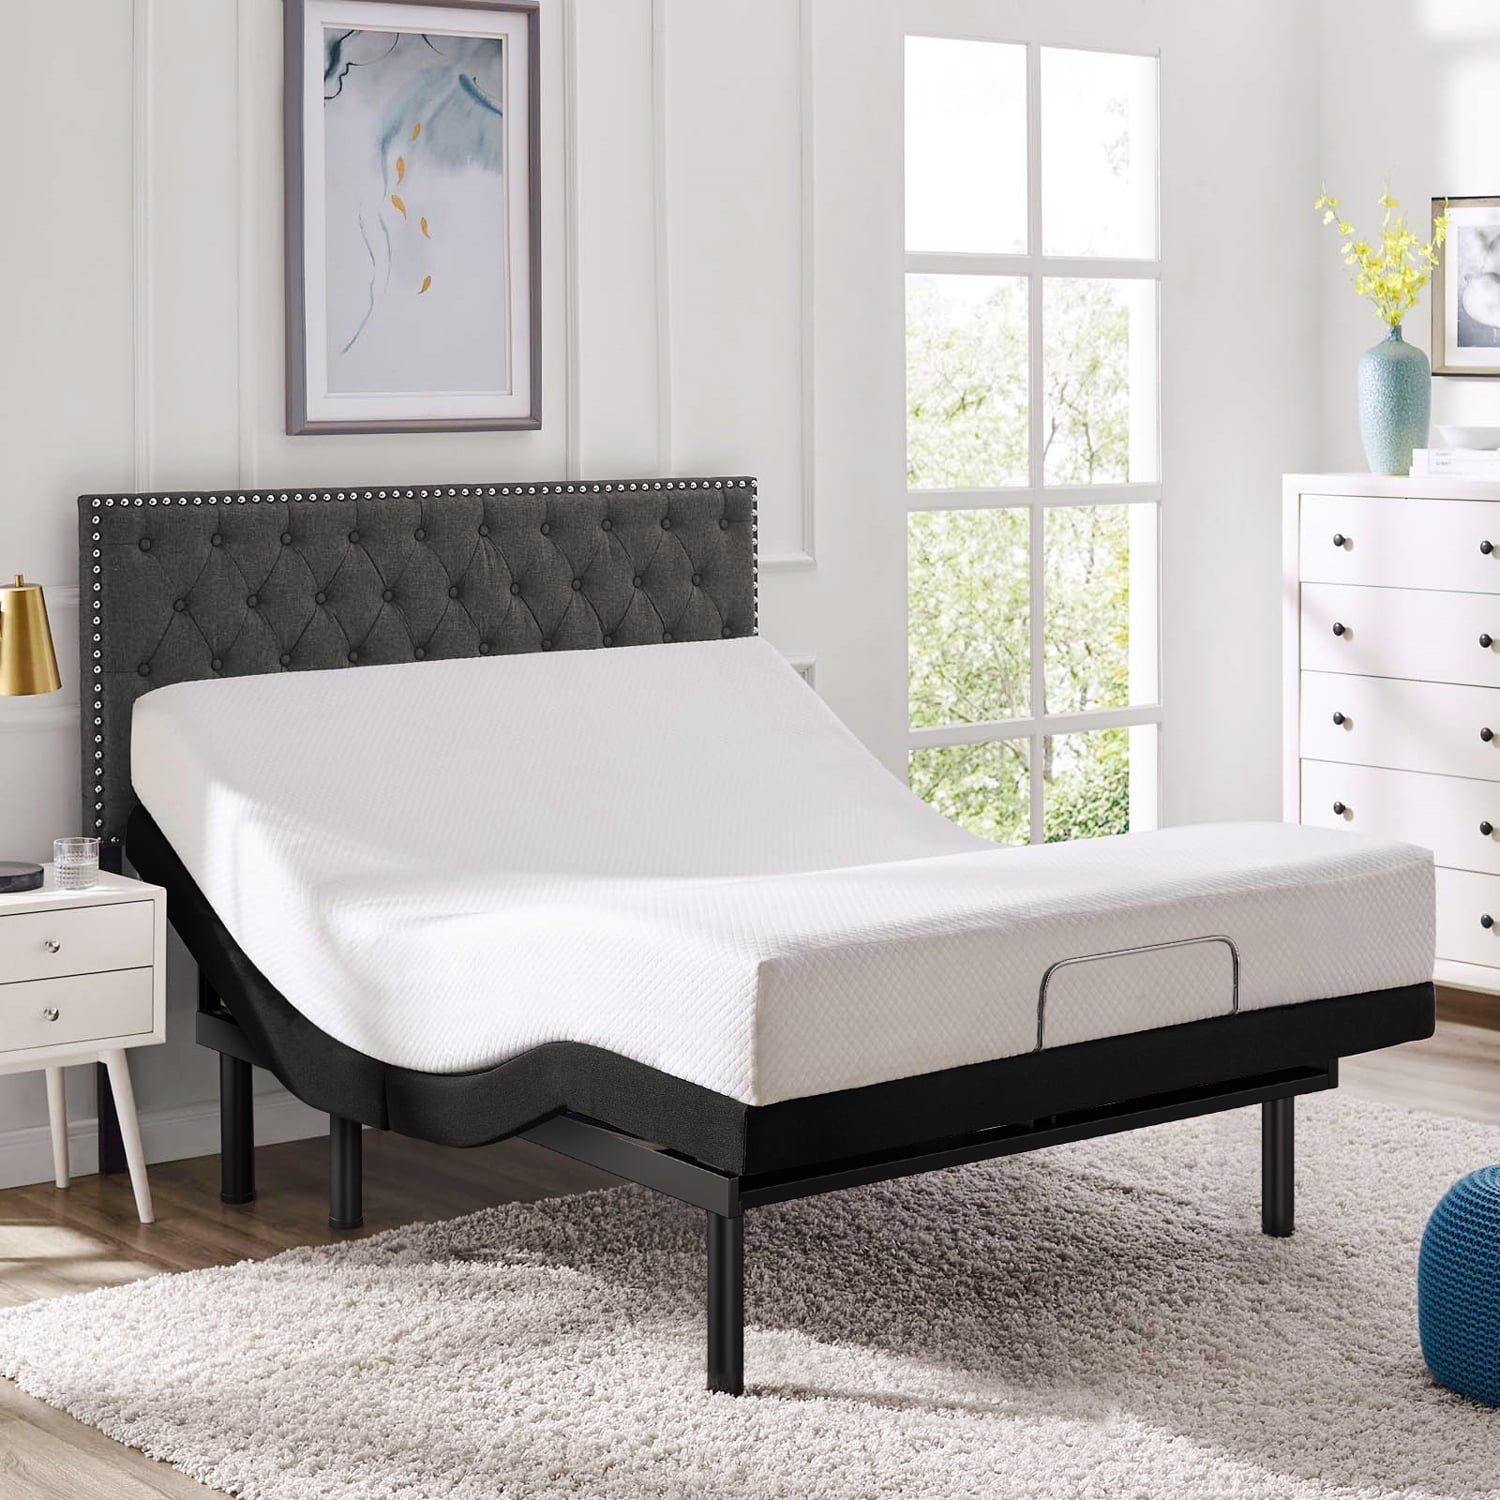 Cottinch Adjustable Bed Base Frame Twin-XL for Stress Management with  Massage, Remote Control 